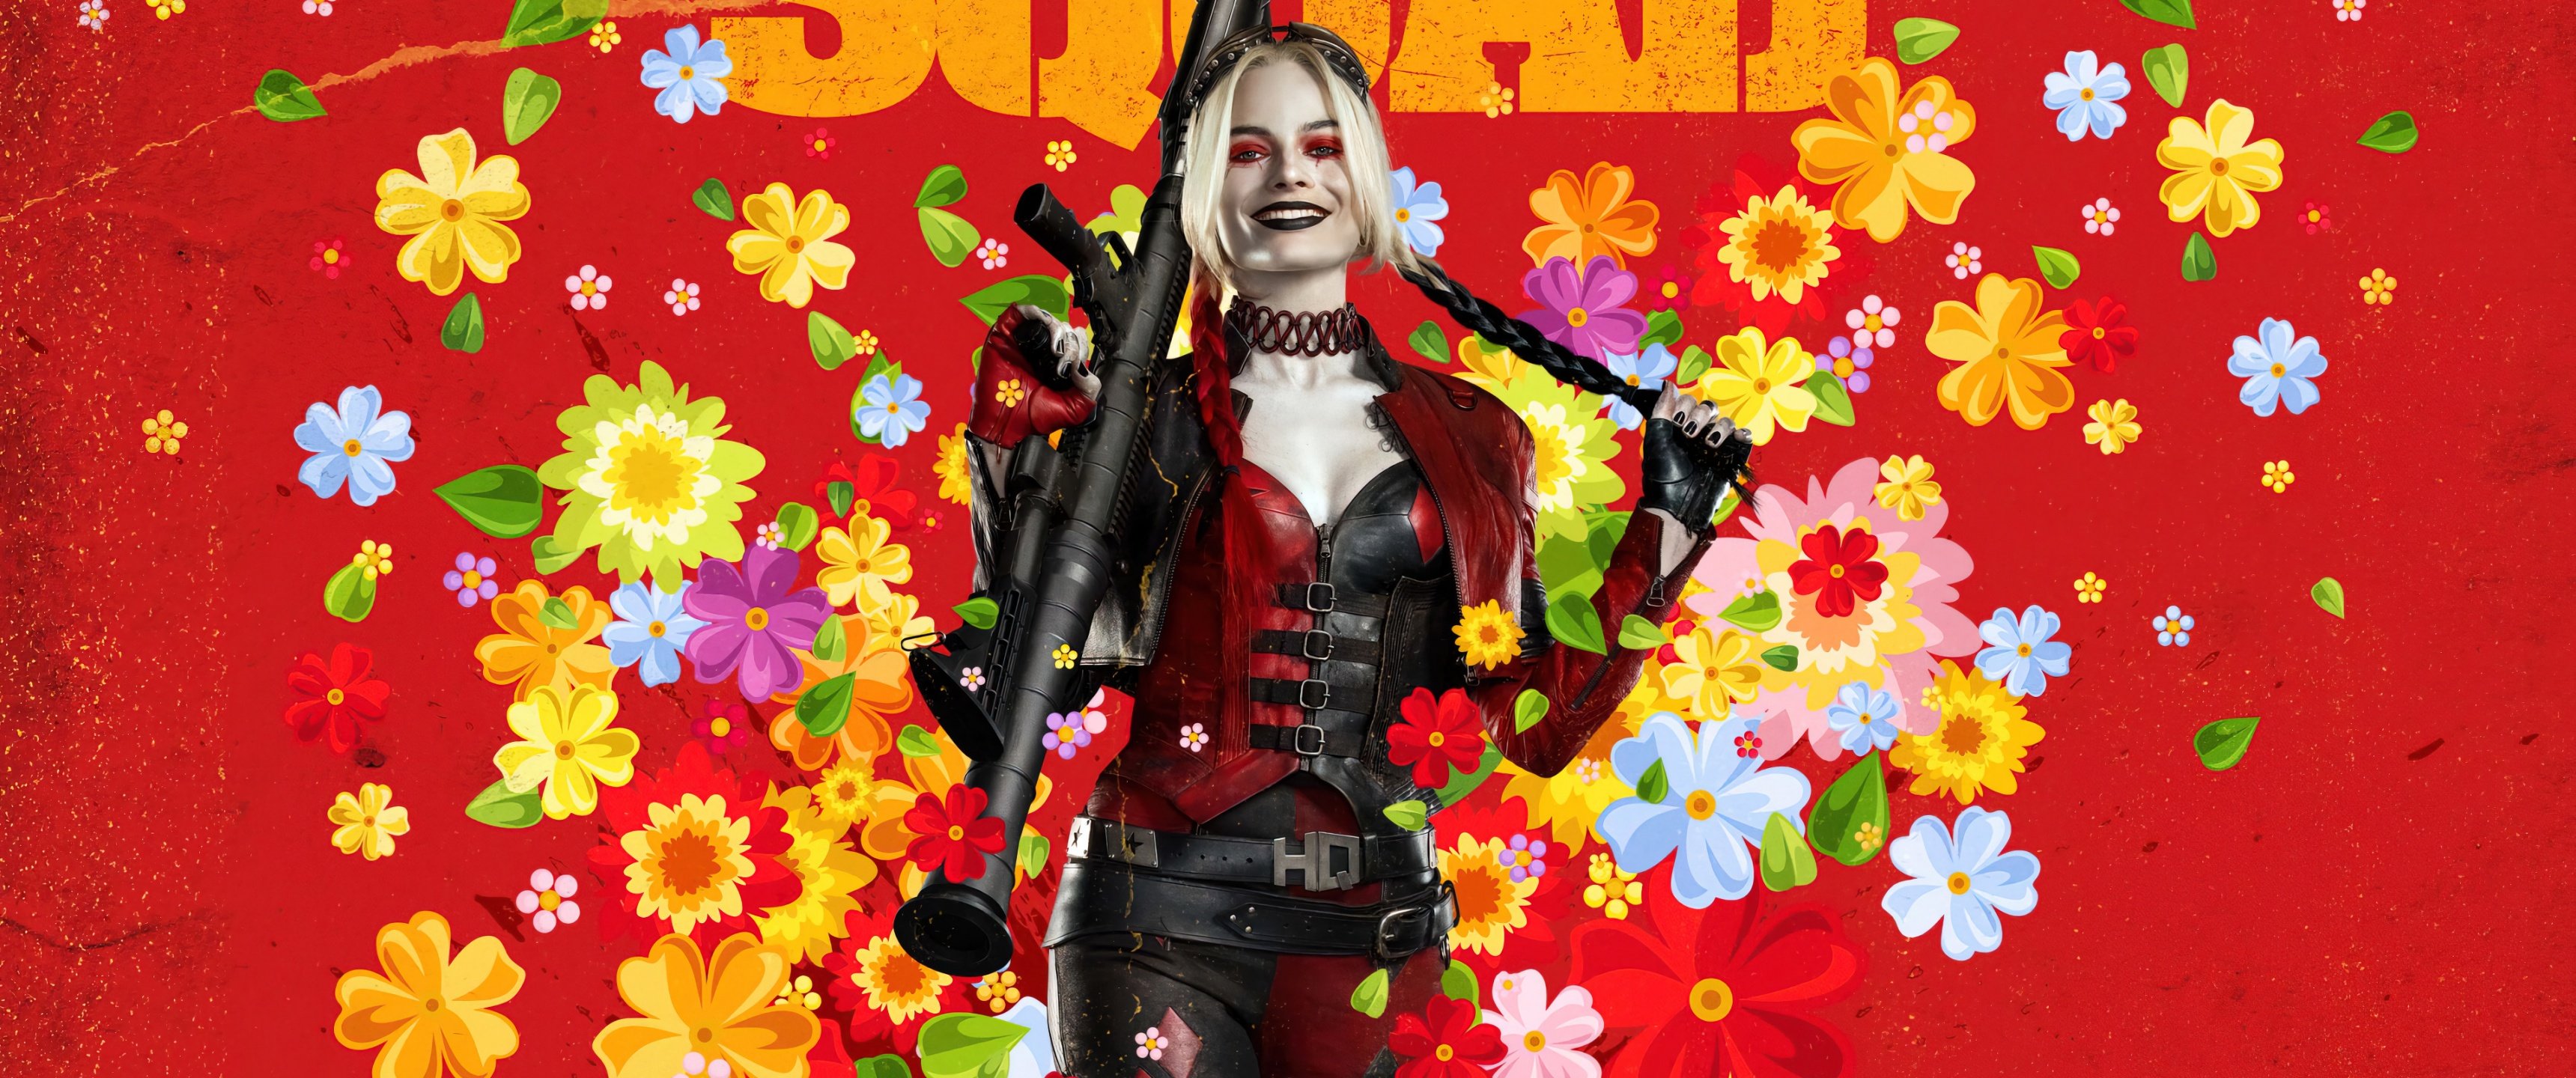 Harley Quinn Wallpaper 4K, Margot Robbie, The Suicide Squad, 2021 Movies, Movies